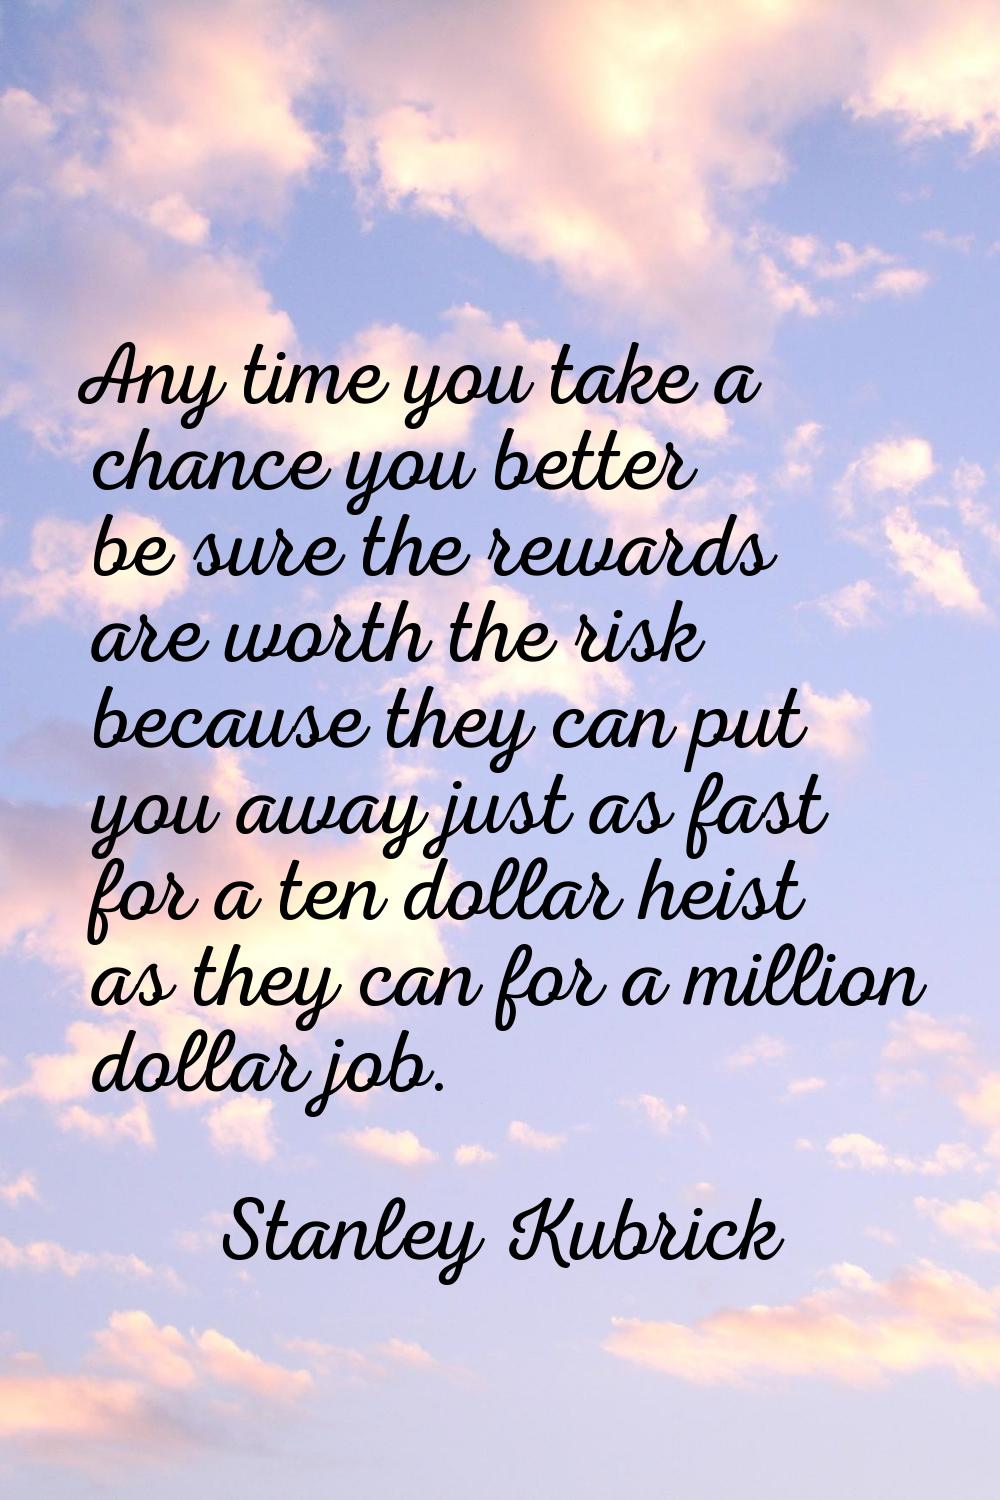 Any time you take a chance you better be sure the rewards are worth the risk because they can put y